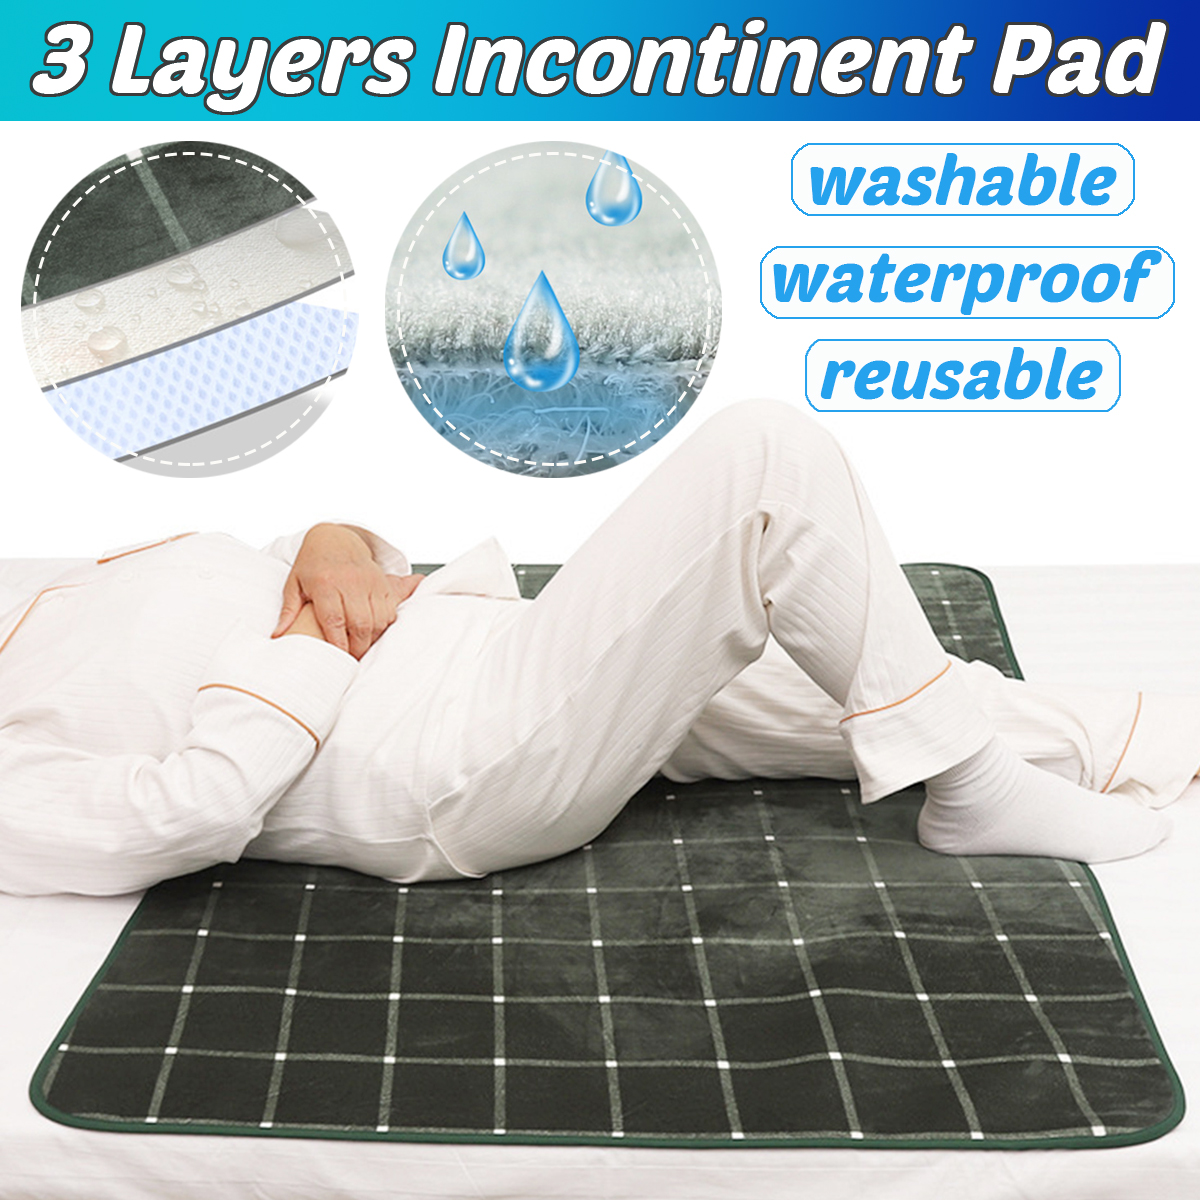 Washable Reusable Waterproof Underpad Bed Cushion Incontinence Kids Adult Mattress Protector 9